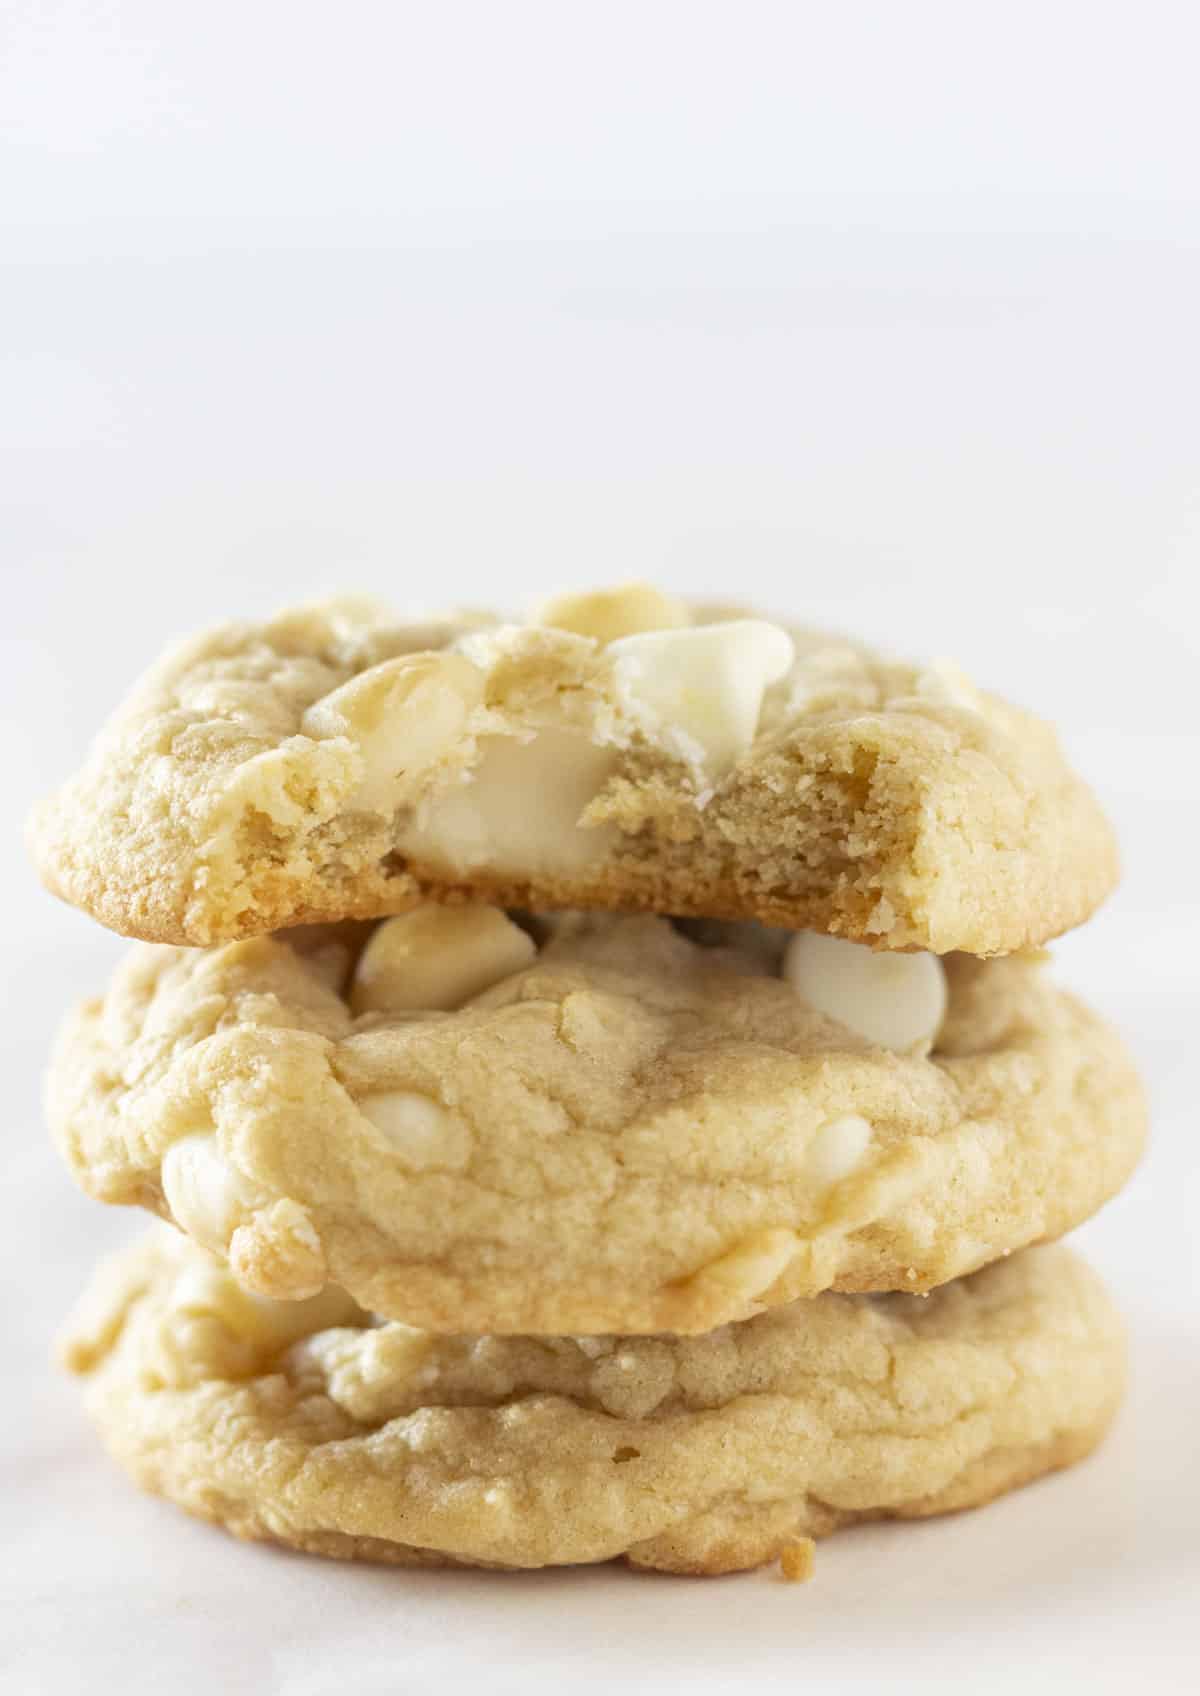 Three White Chocolate Macadamia Nut Cookies stacked on top of each other with a bite taken out of the top one.